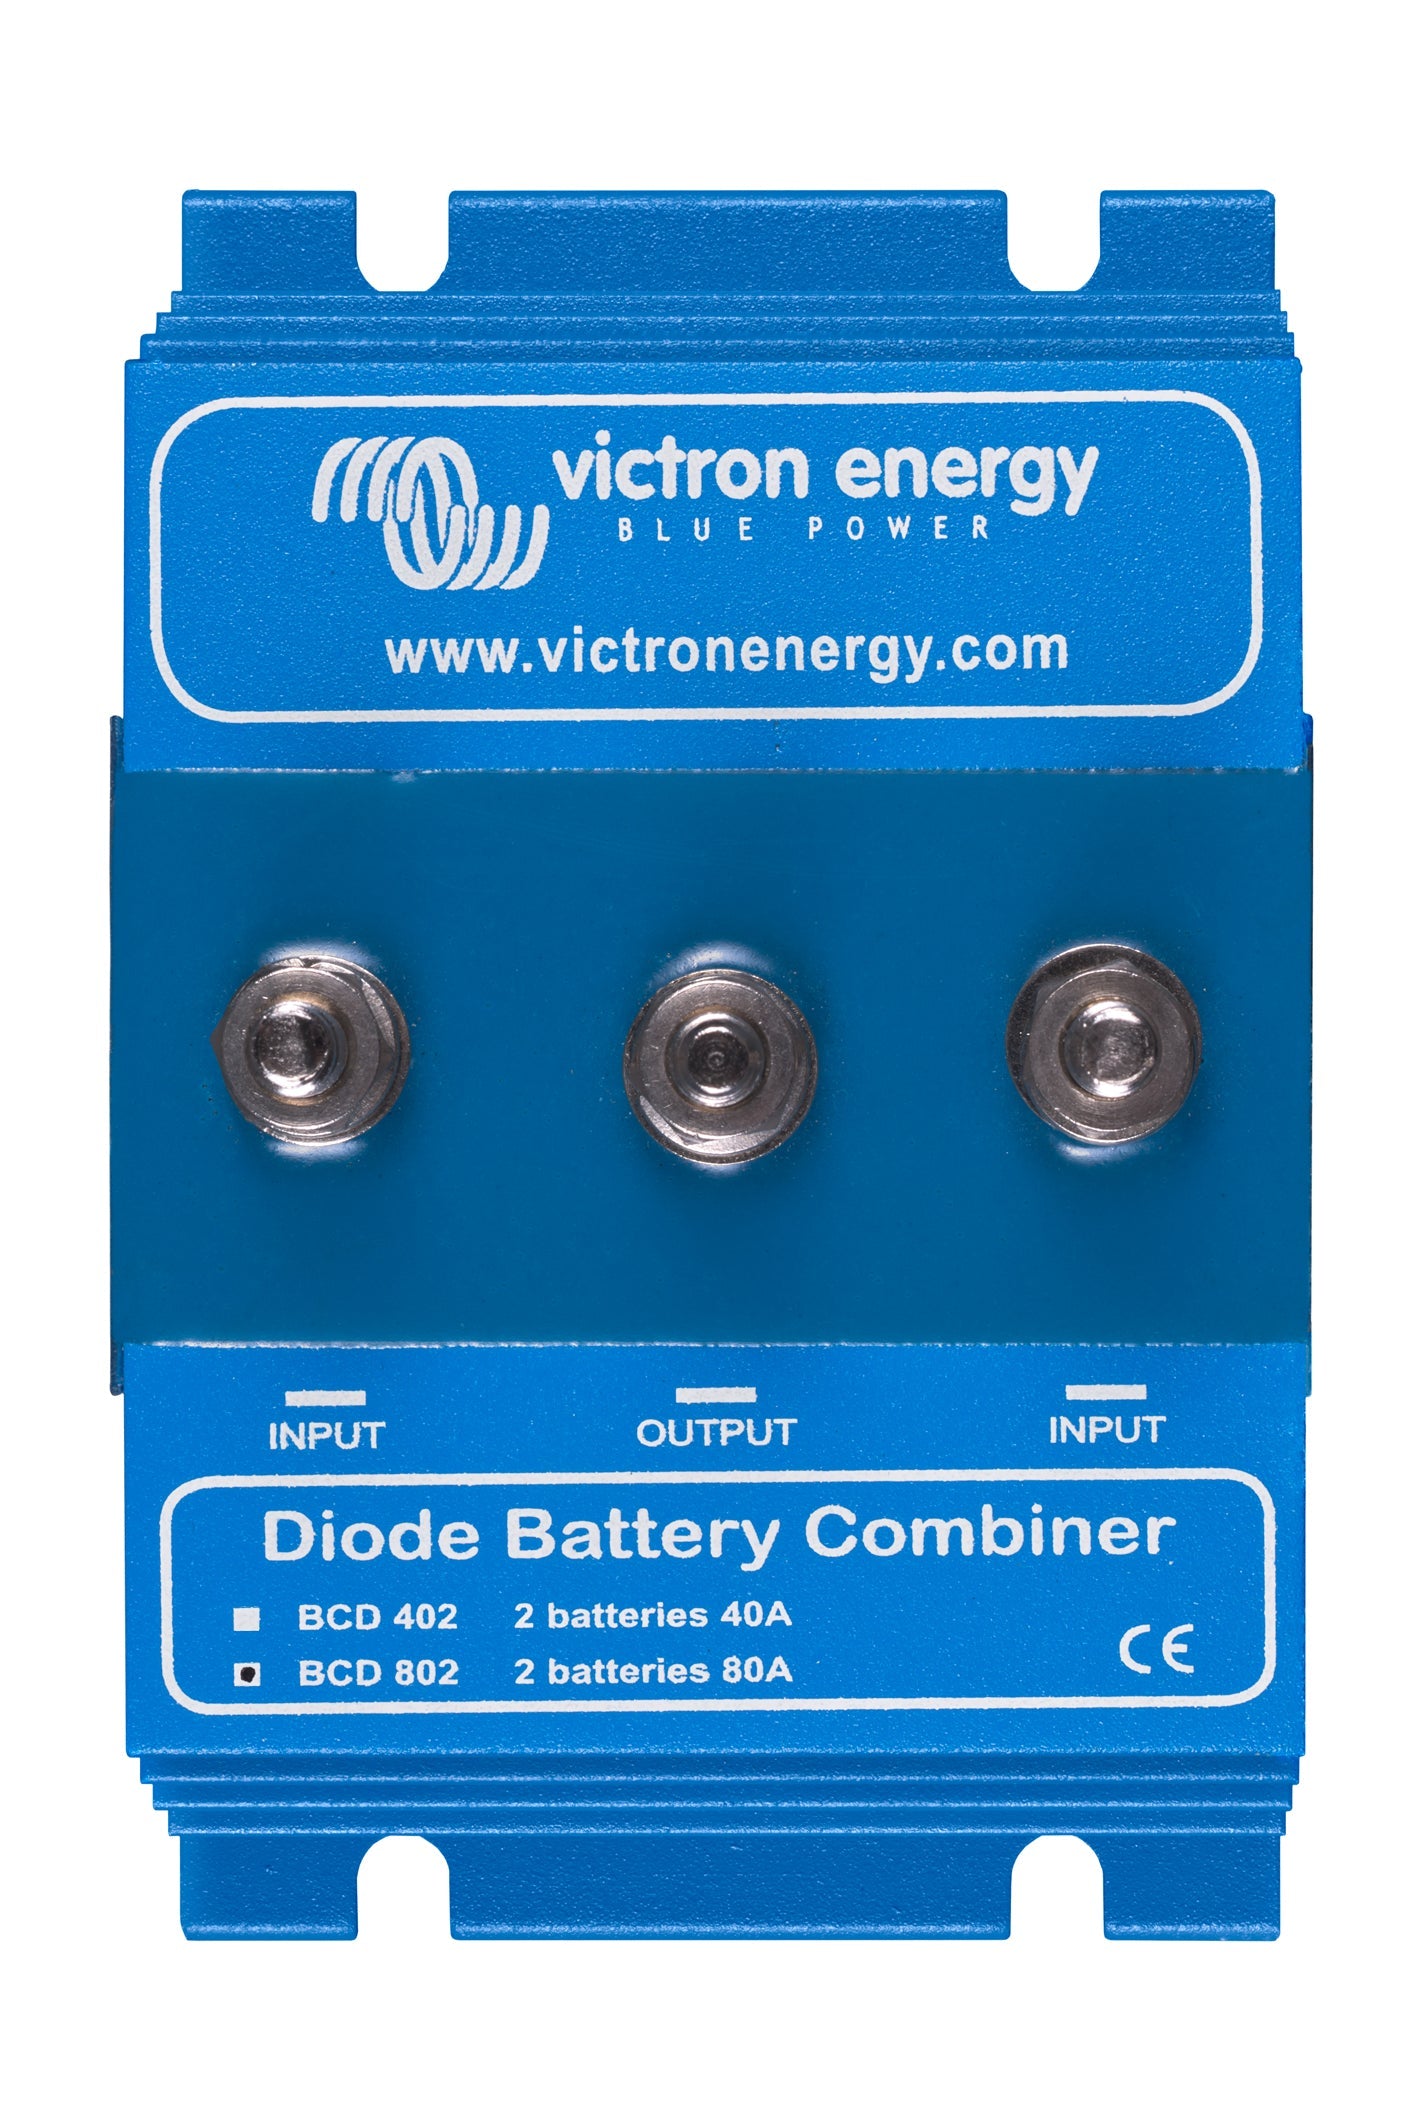 Victron Battery Combiner Diode BCD000802000 BCD 802 2 batteries 80A (combiner diode)